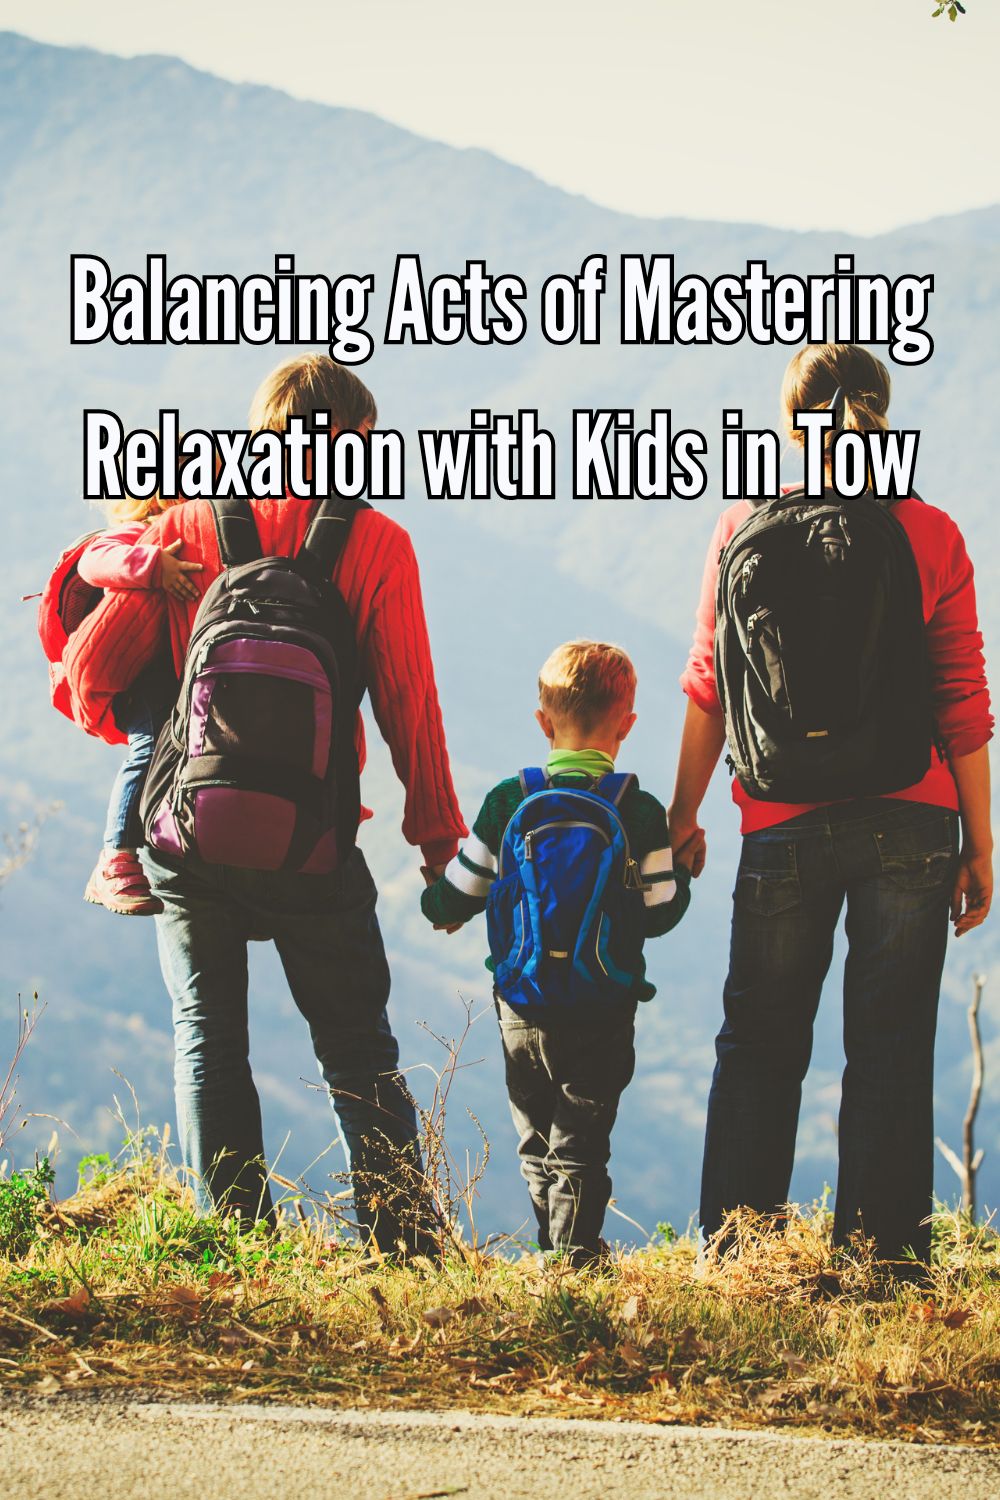 Balancing Acts of Mastering Relaxation with Kids in Tow